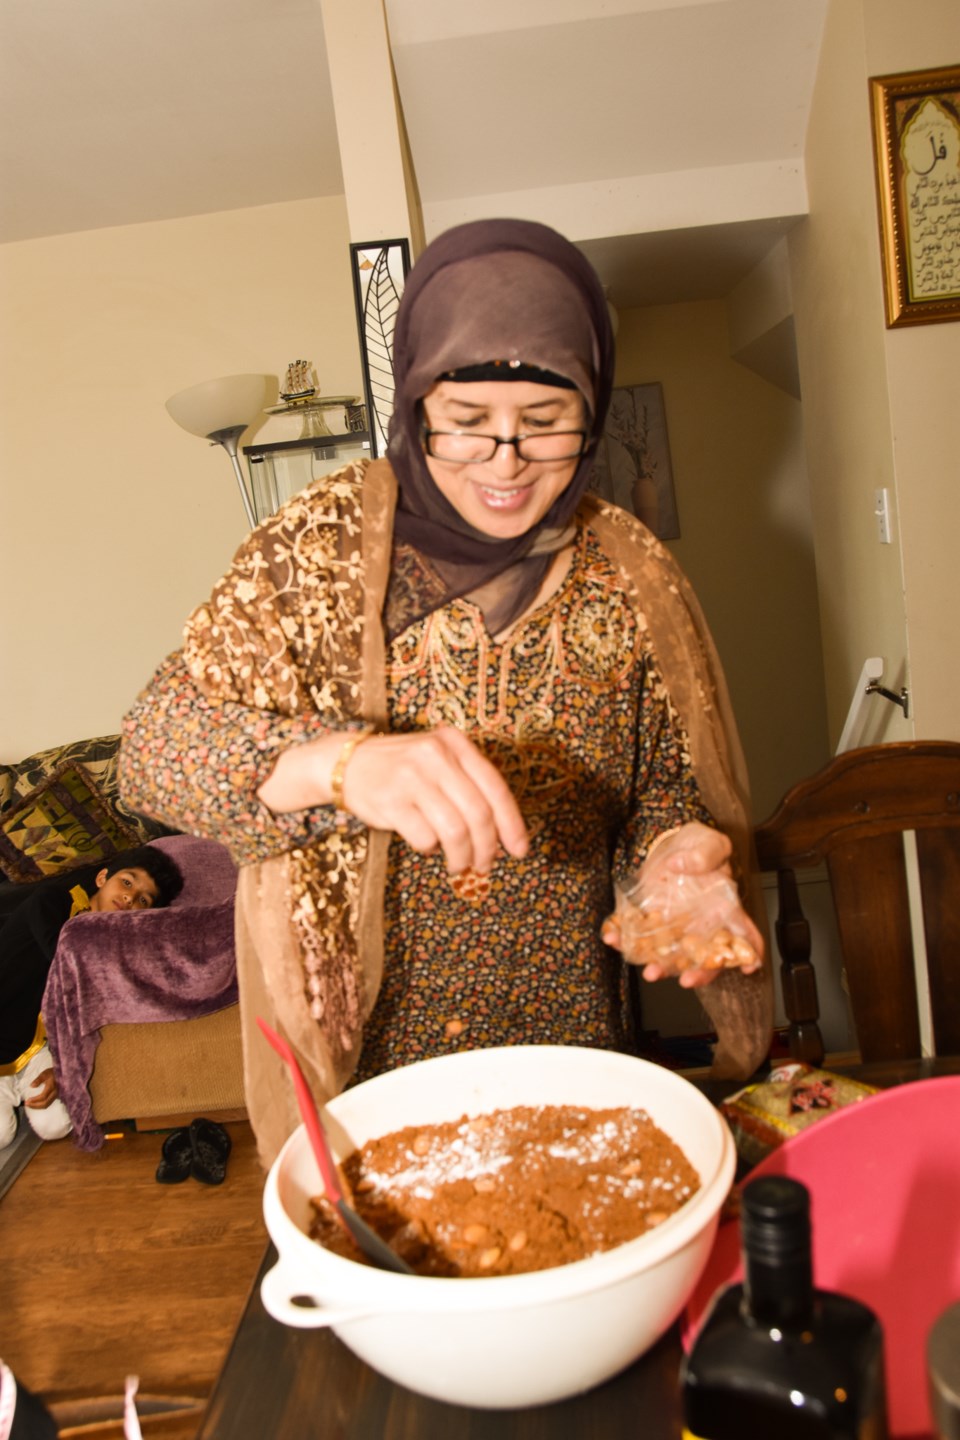 Mahsoune prepares Moroccan sellou, a nutritional sweet made with a mix of roasted flour, butter, hon